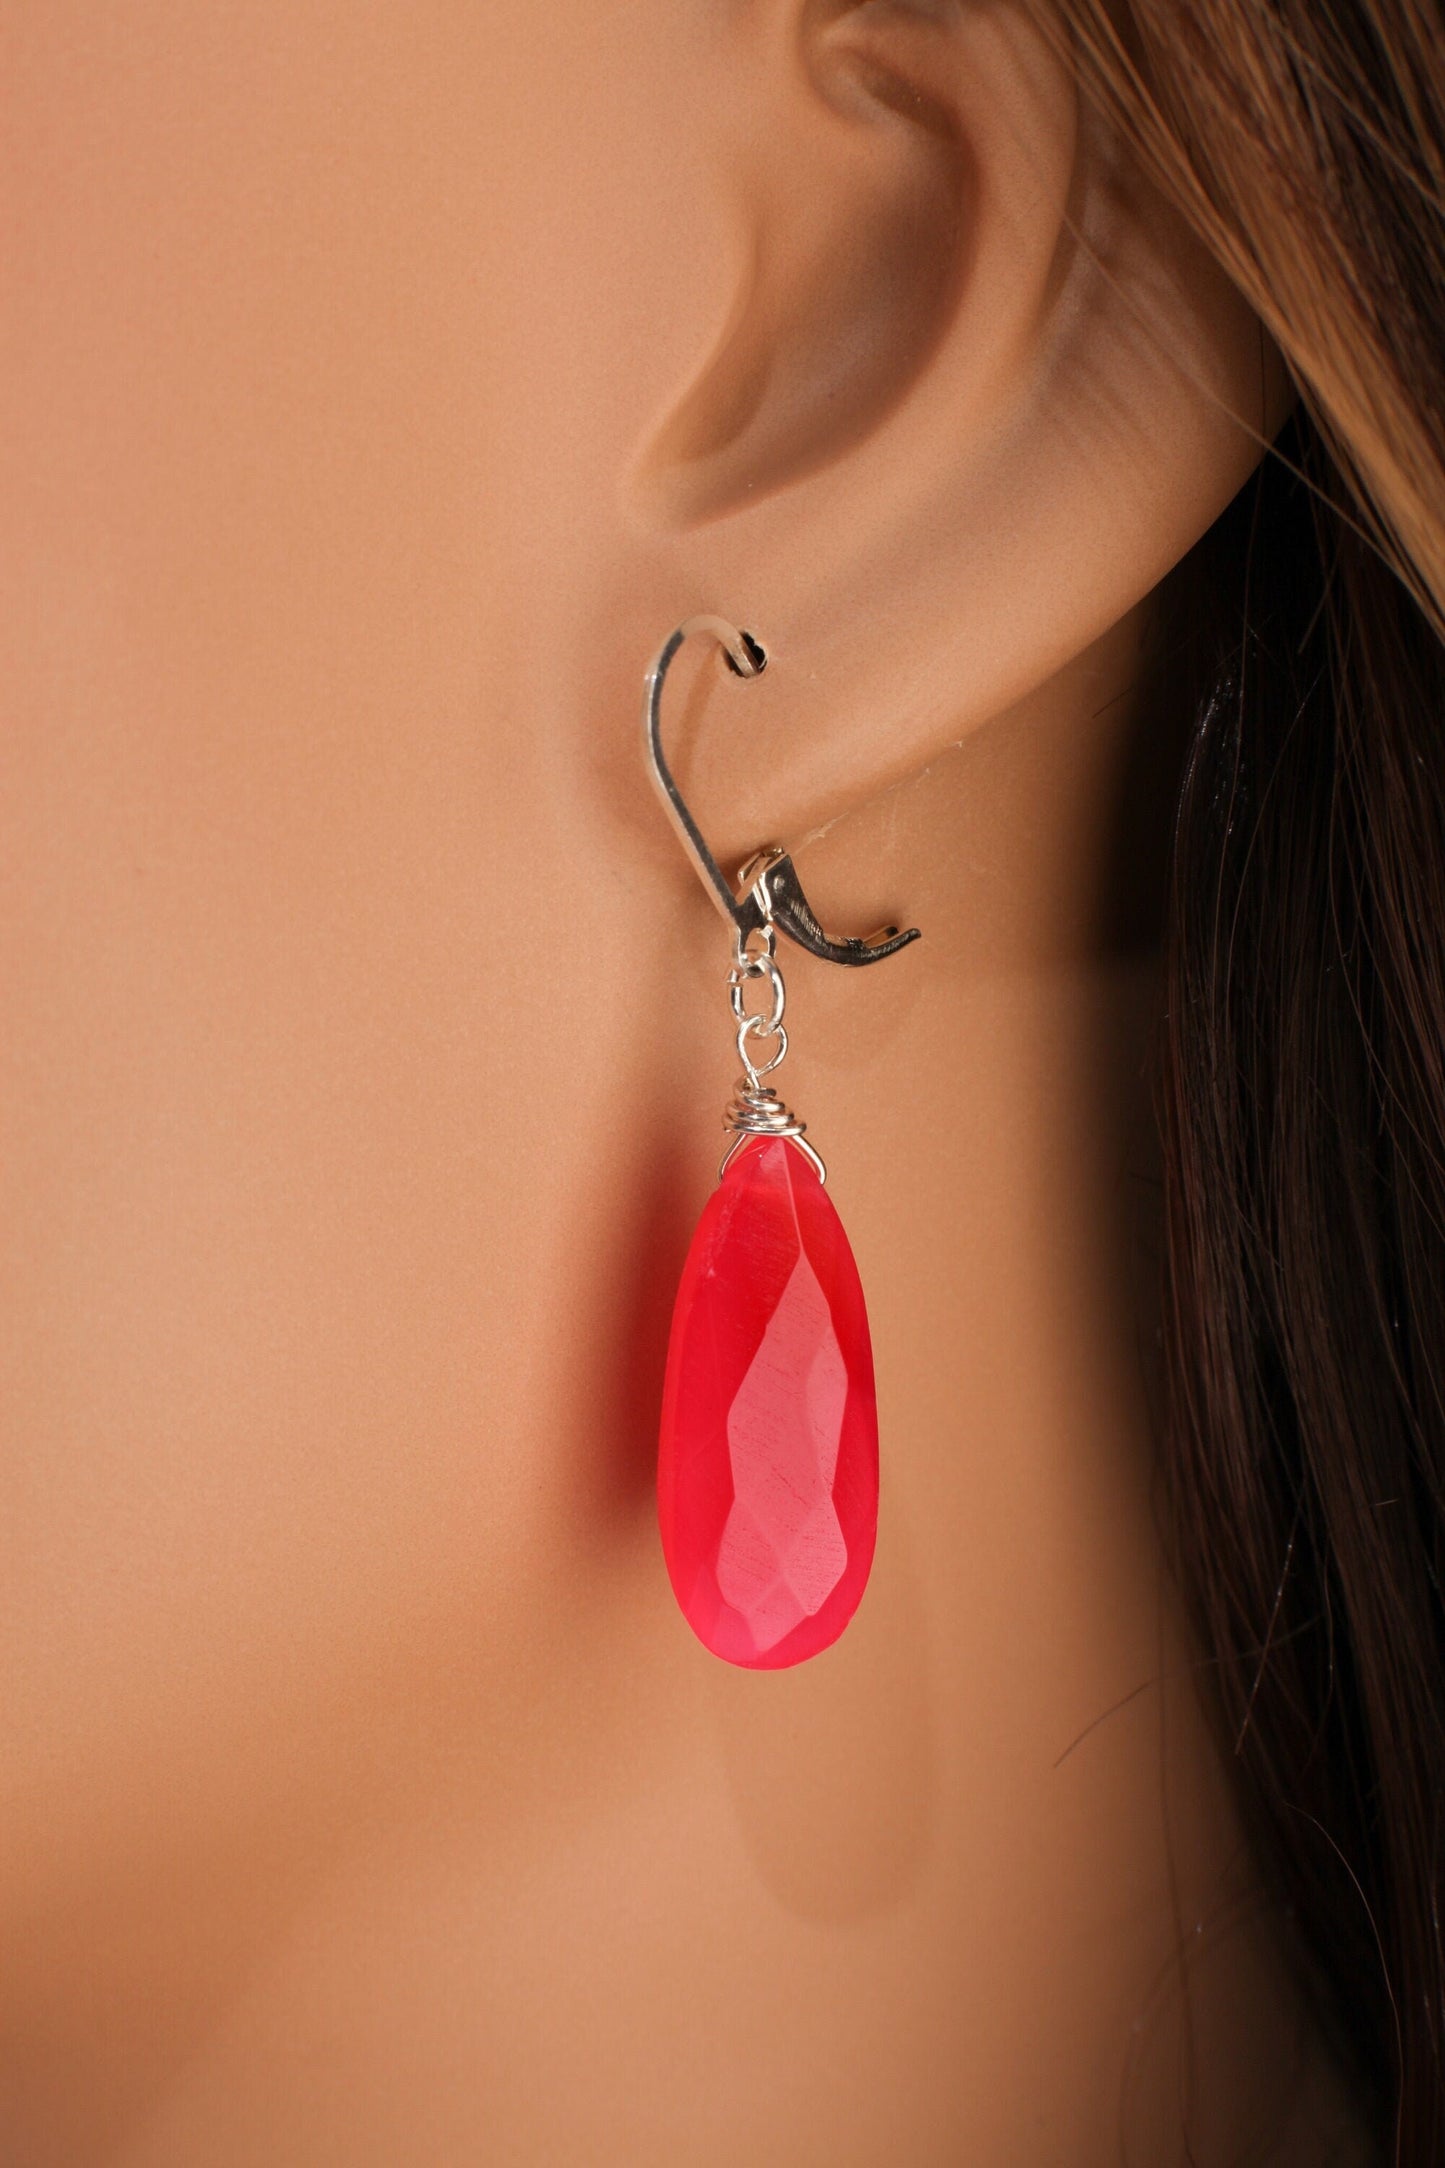 Hot Pink Chalcedony 9.5x25mm Briolette Teardrop, 925 Sterling Silver Earwire or Leverback, Boho, Gemstone Jewelry Gift for Her